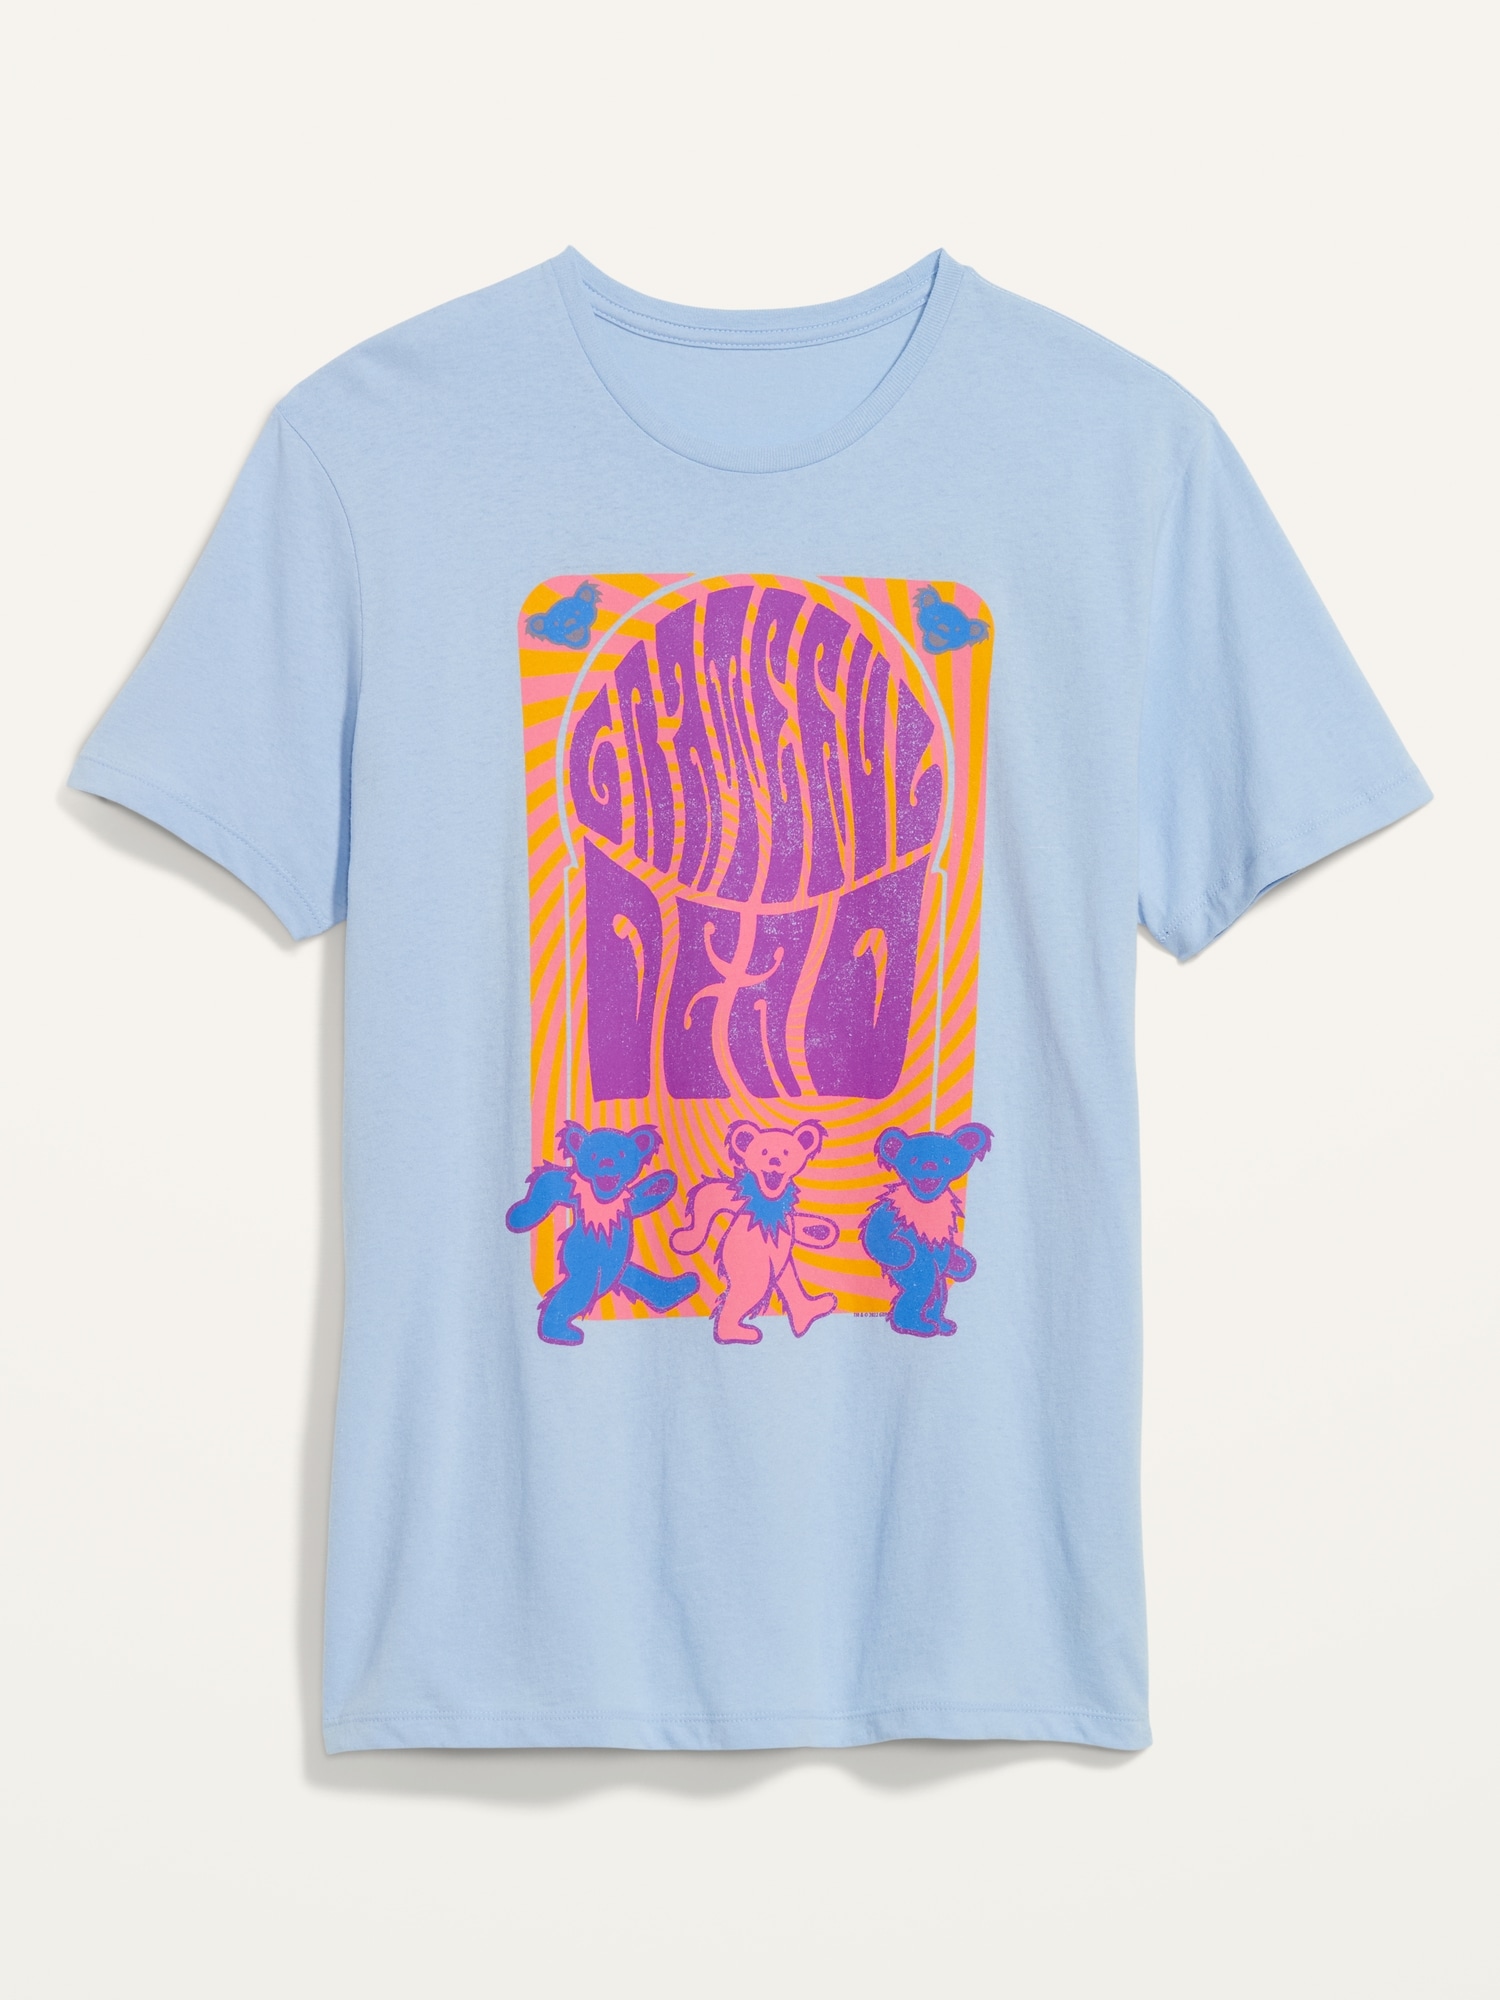 Grateful Dead™ Gender-Neutral Graphic T-Shirt for Adults | Old Navy